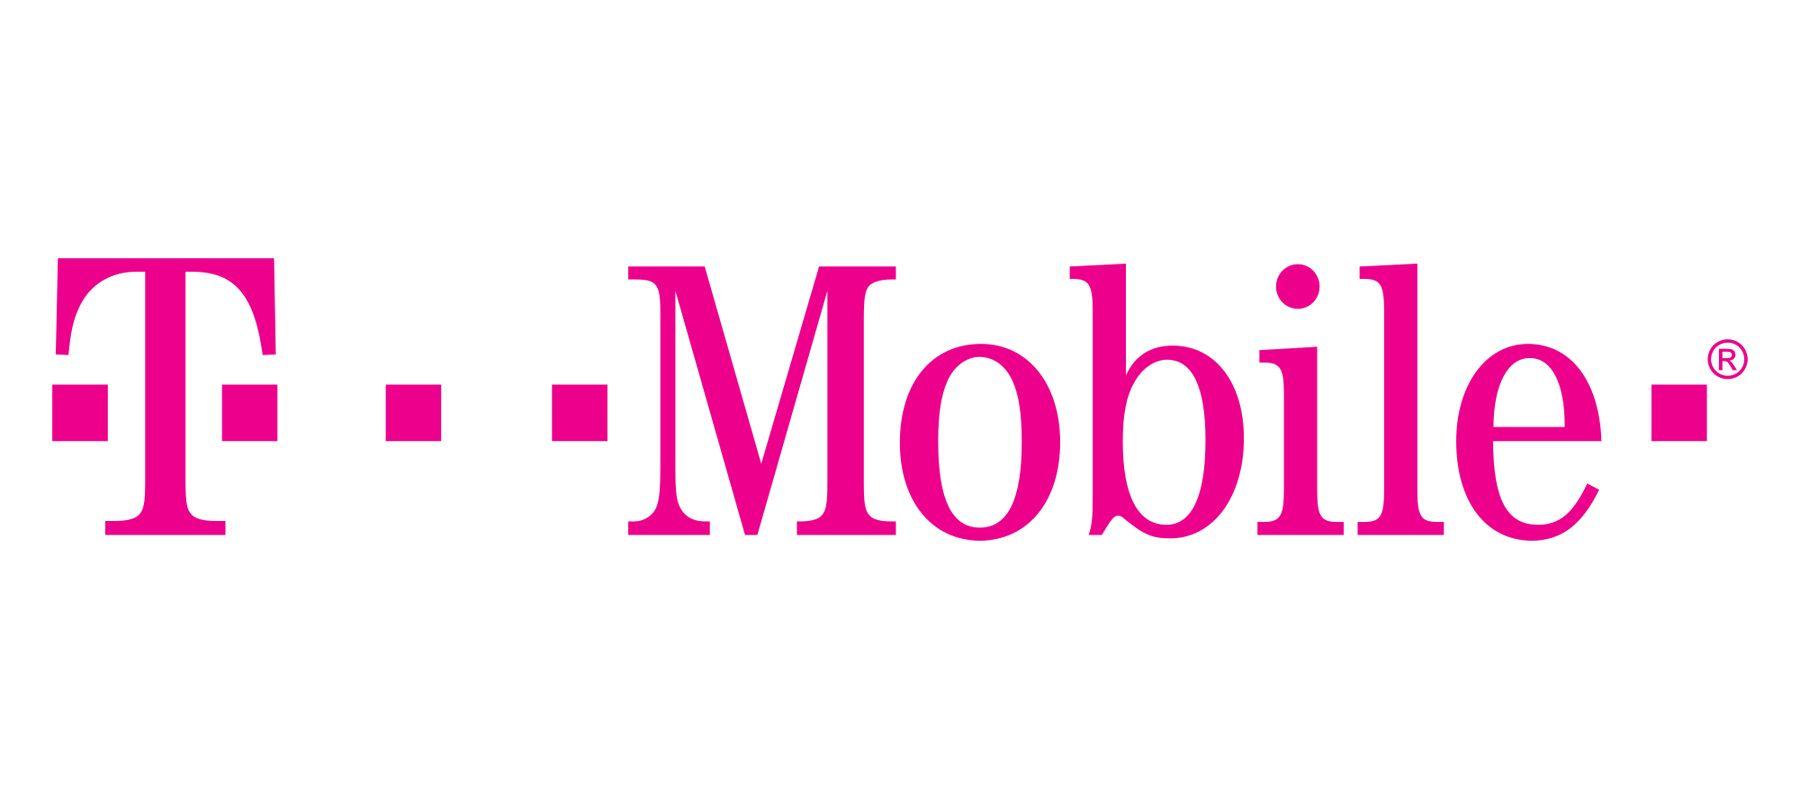 Modern Mobile Logo - T-Mobile Logo, T-Mobile Symbol, Meaning, History and Evolution